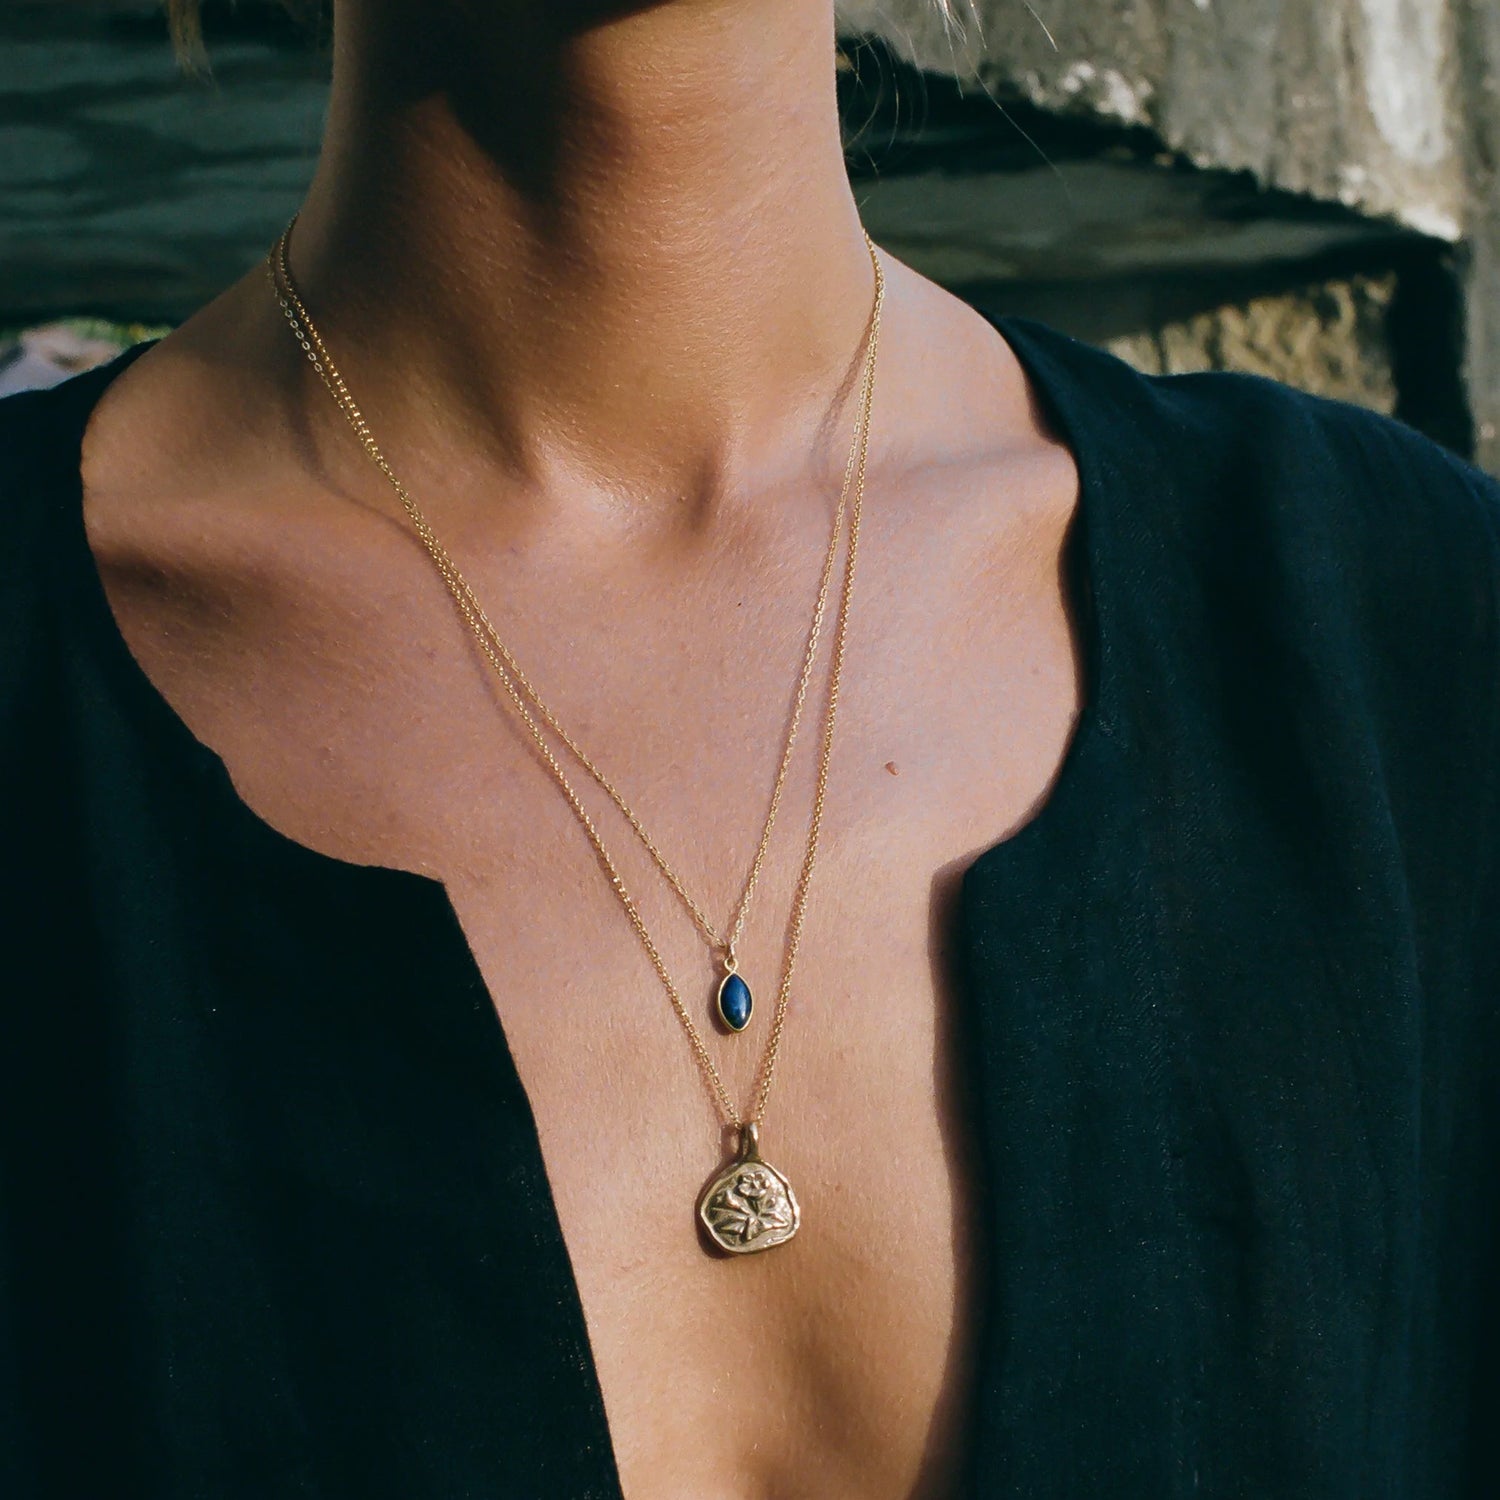 DATURA NECKLACE BY CATORI LIFE